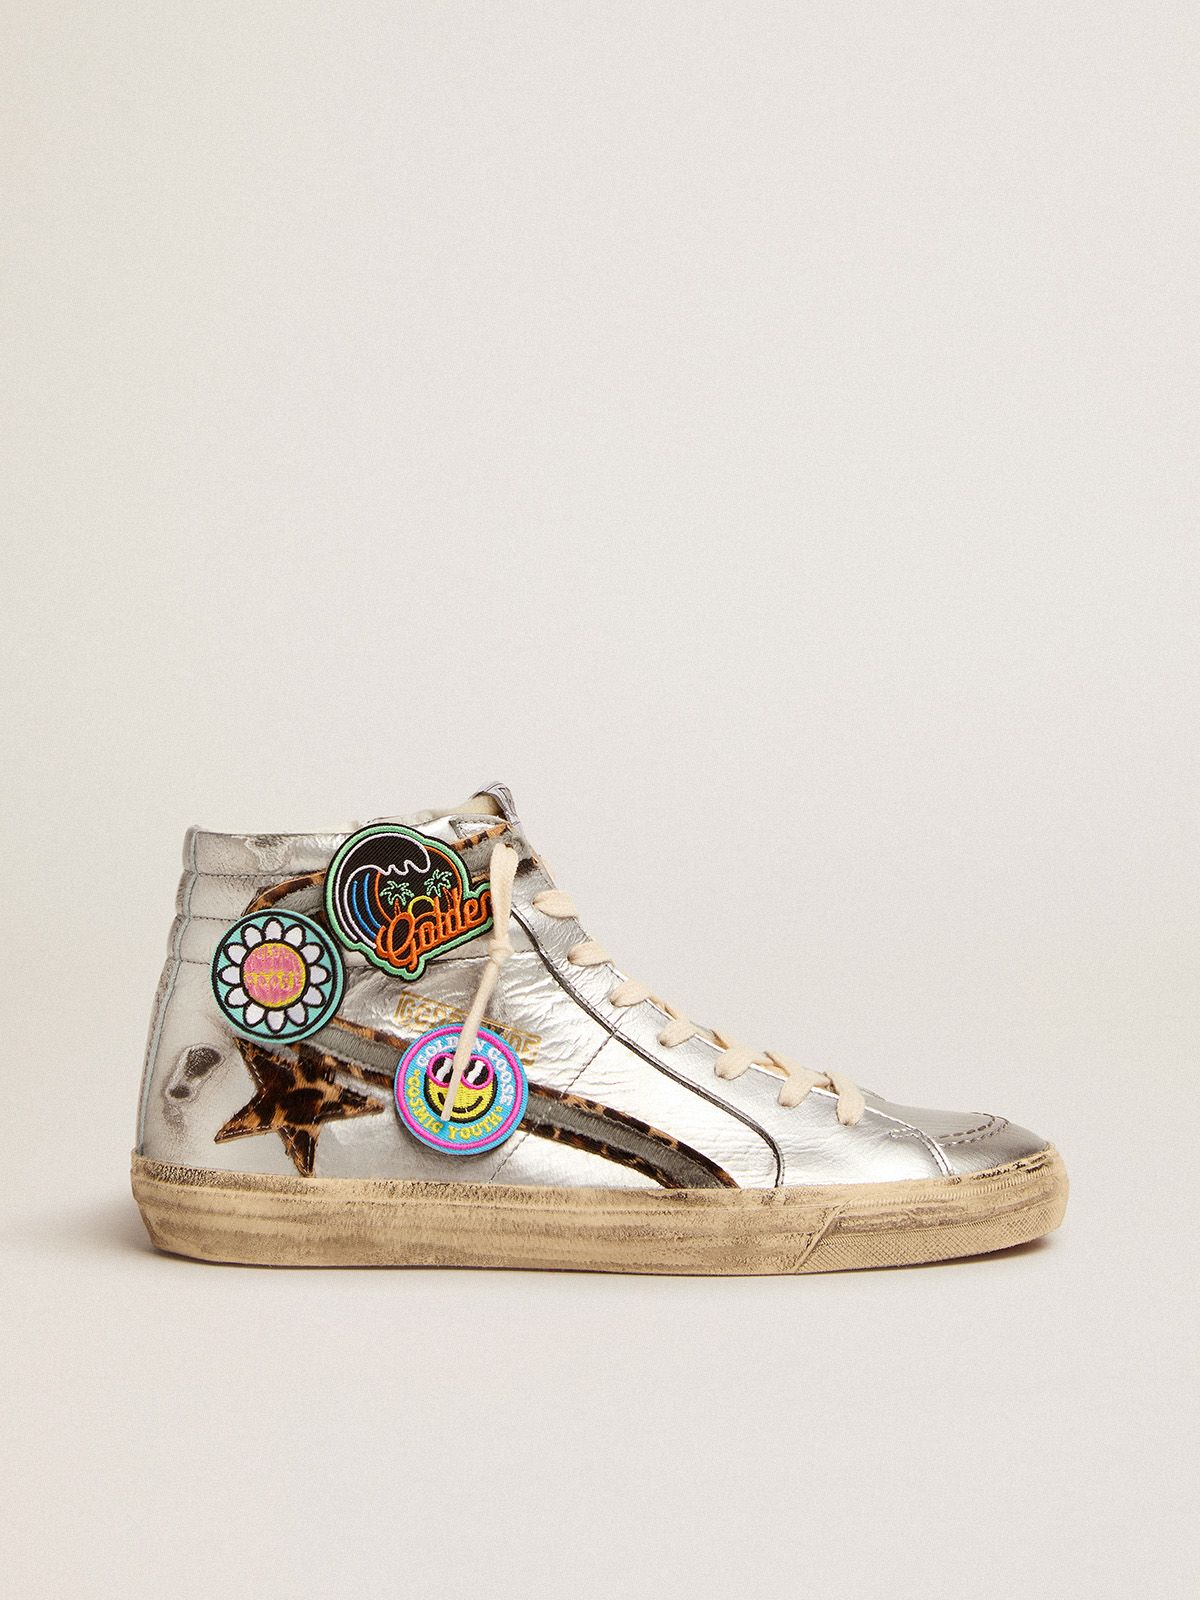 Slide sneakers in silver laminated leather with leopard-print pony skin star and flash with detachable multicolored patches